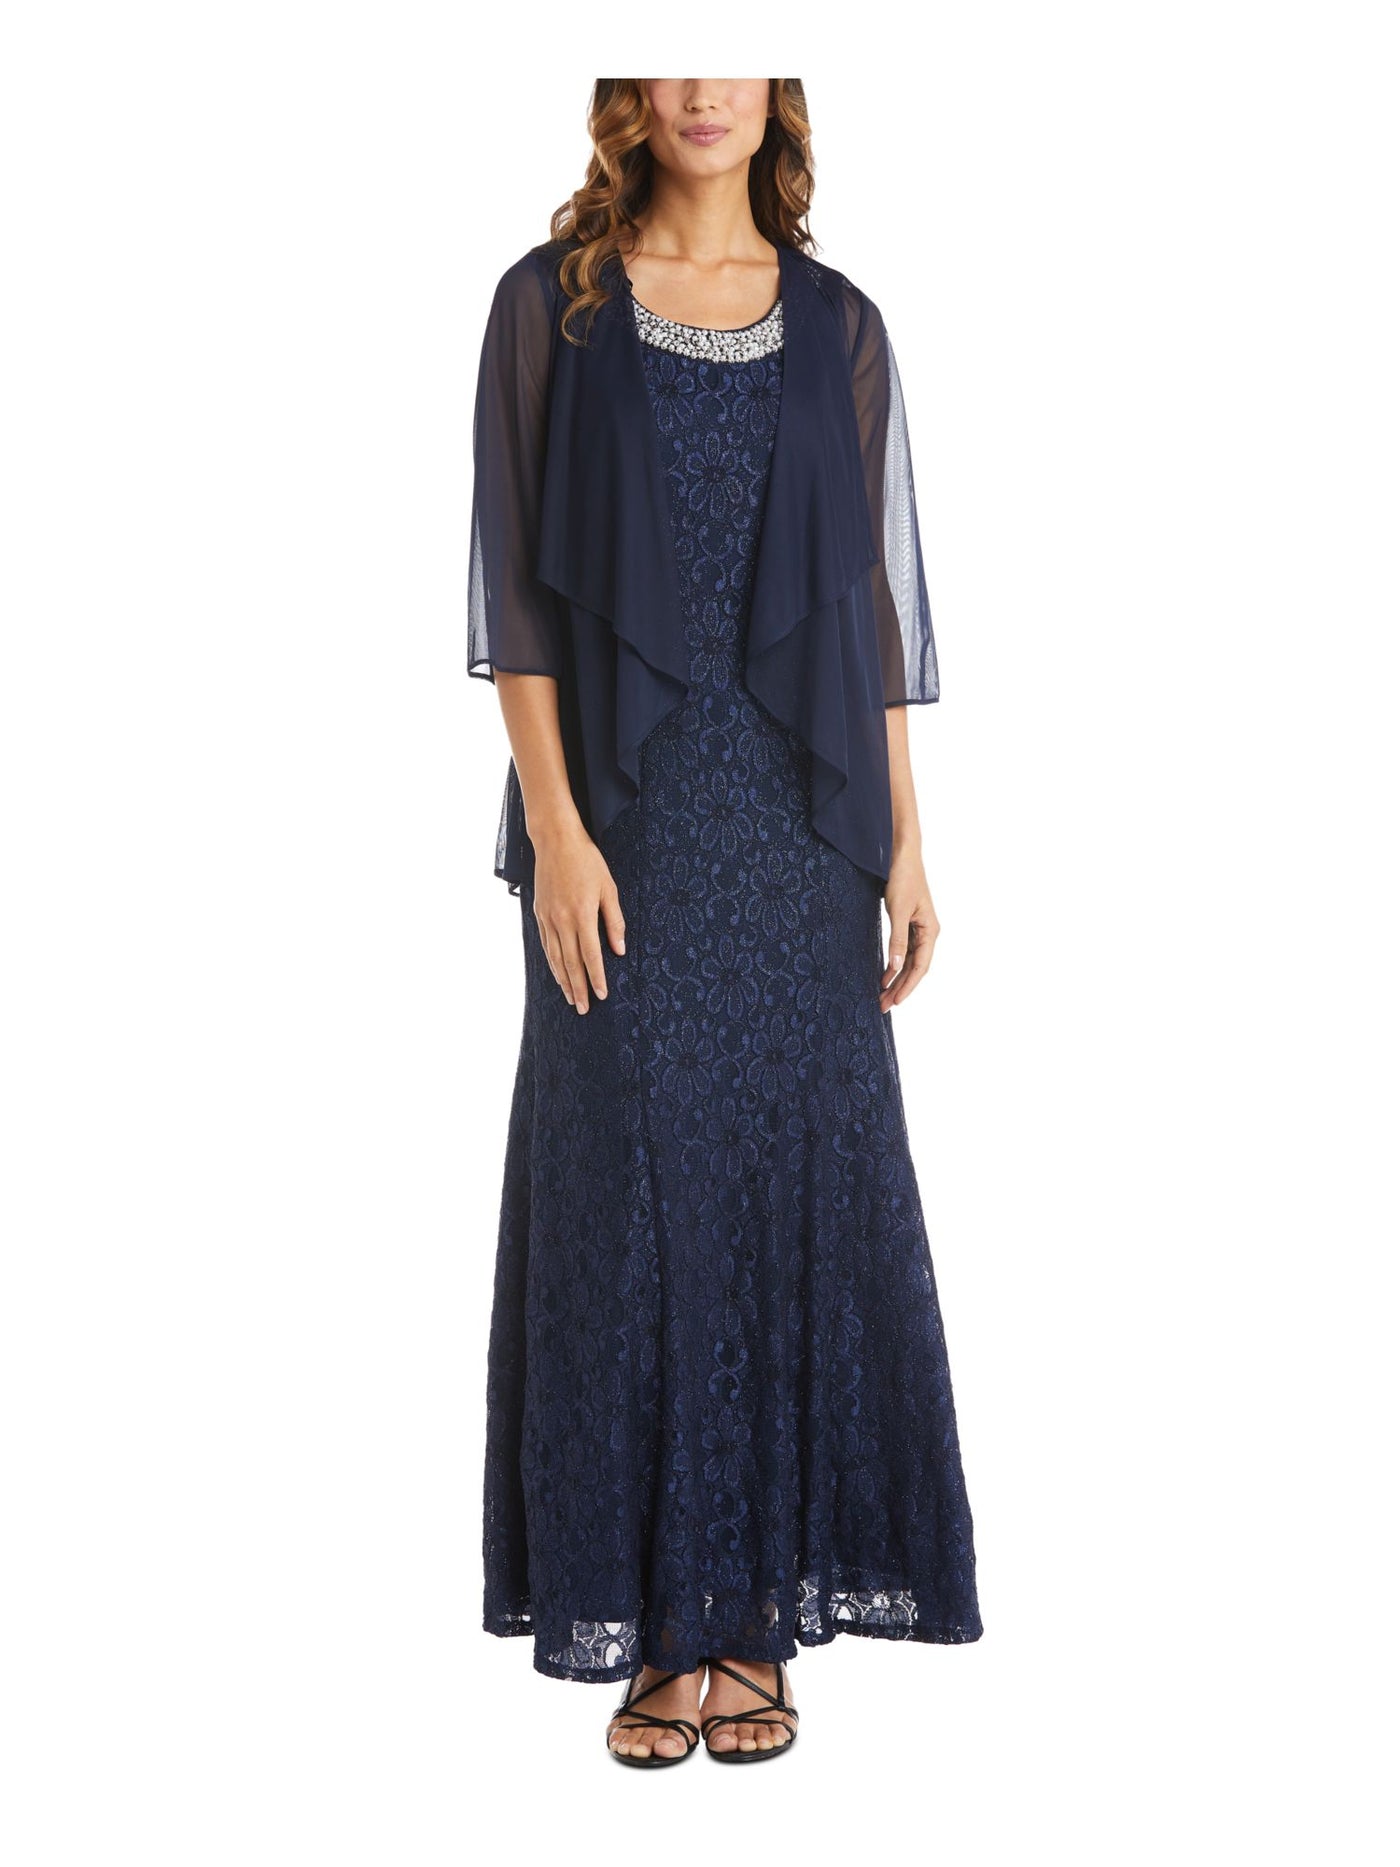 R&M RICHARDS Womens Navy Lace Embellished Glitter 3/4 Sheer Jacket Floral Sleeveless Scoop Neck Maxi Evening Gown Dress 6